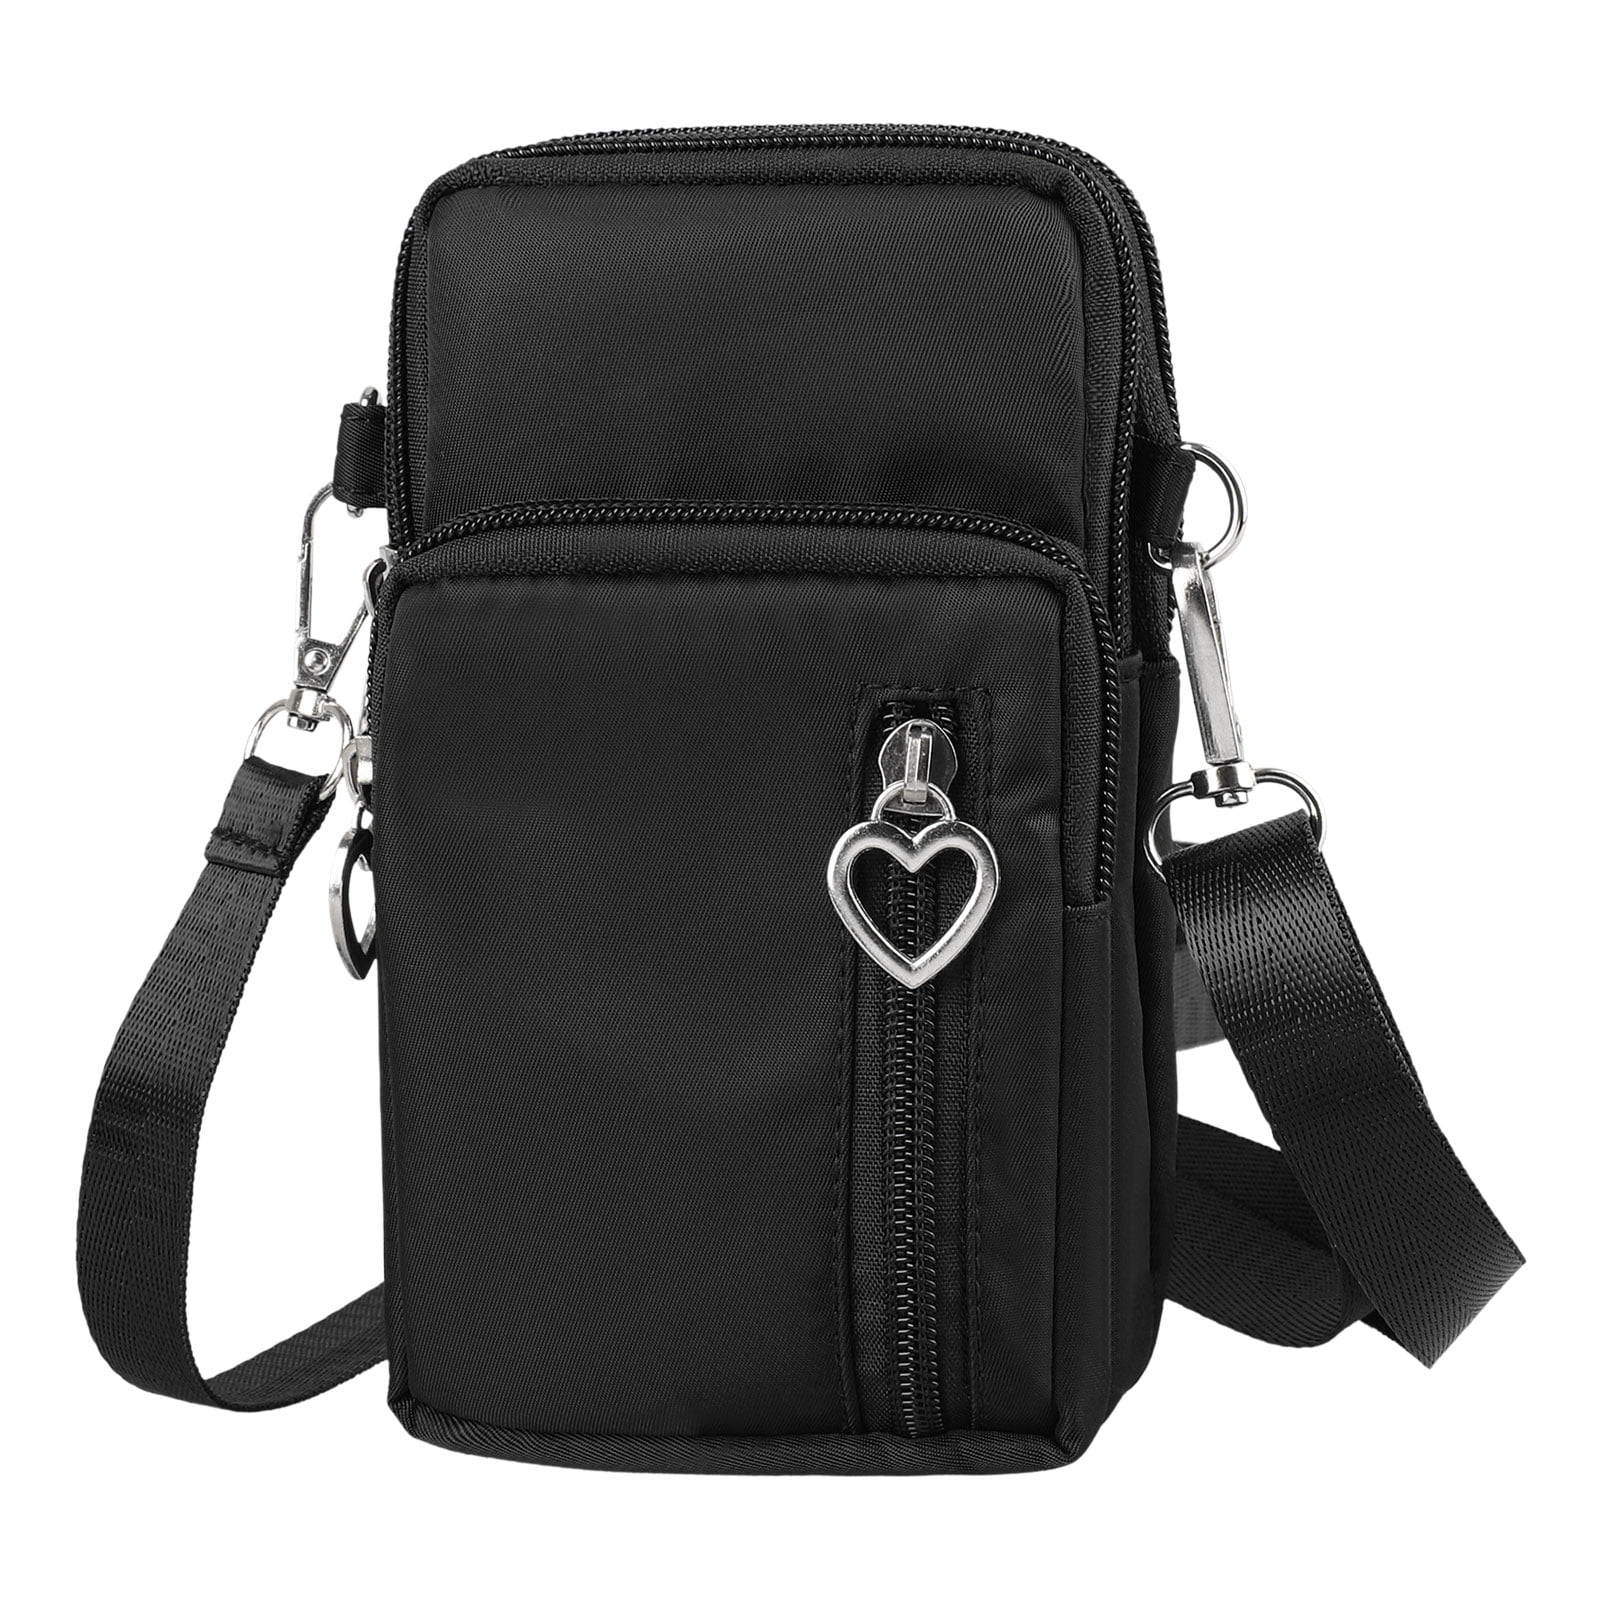 Phone Bag with Detachable Shoulder Strap and Wristband